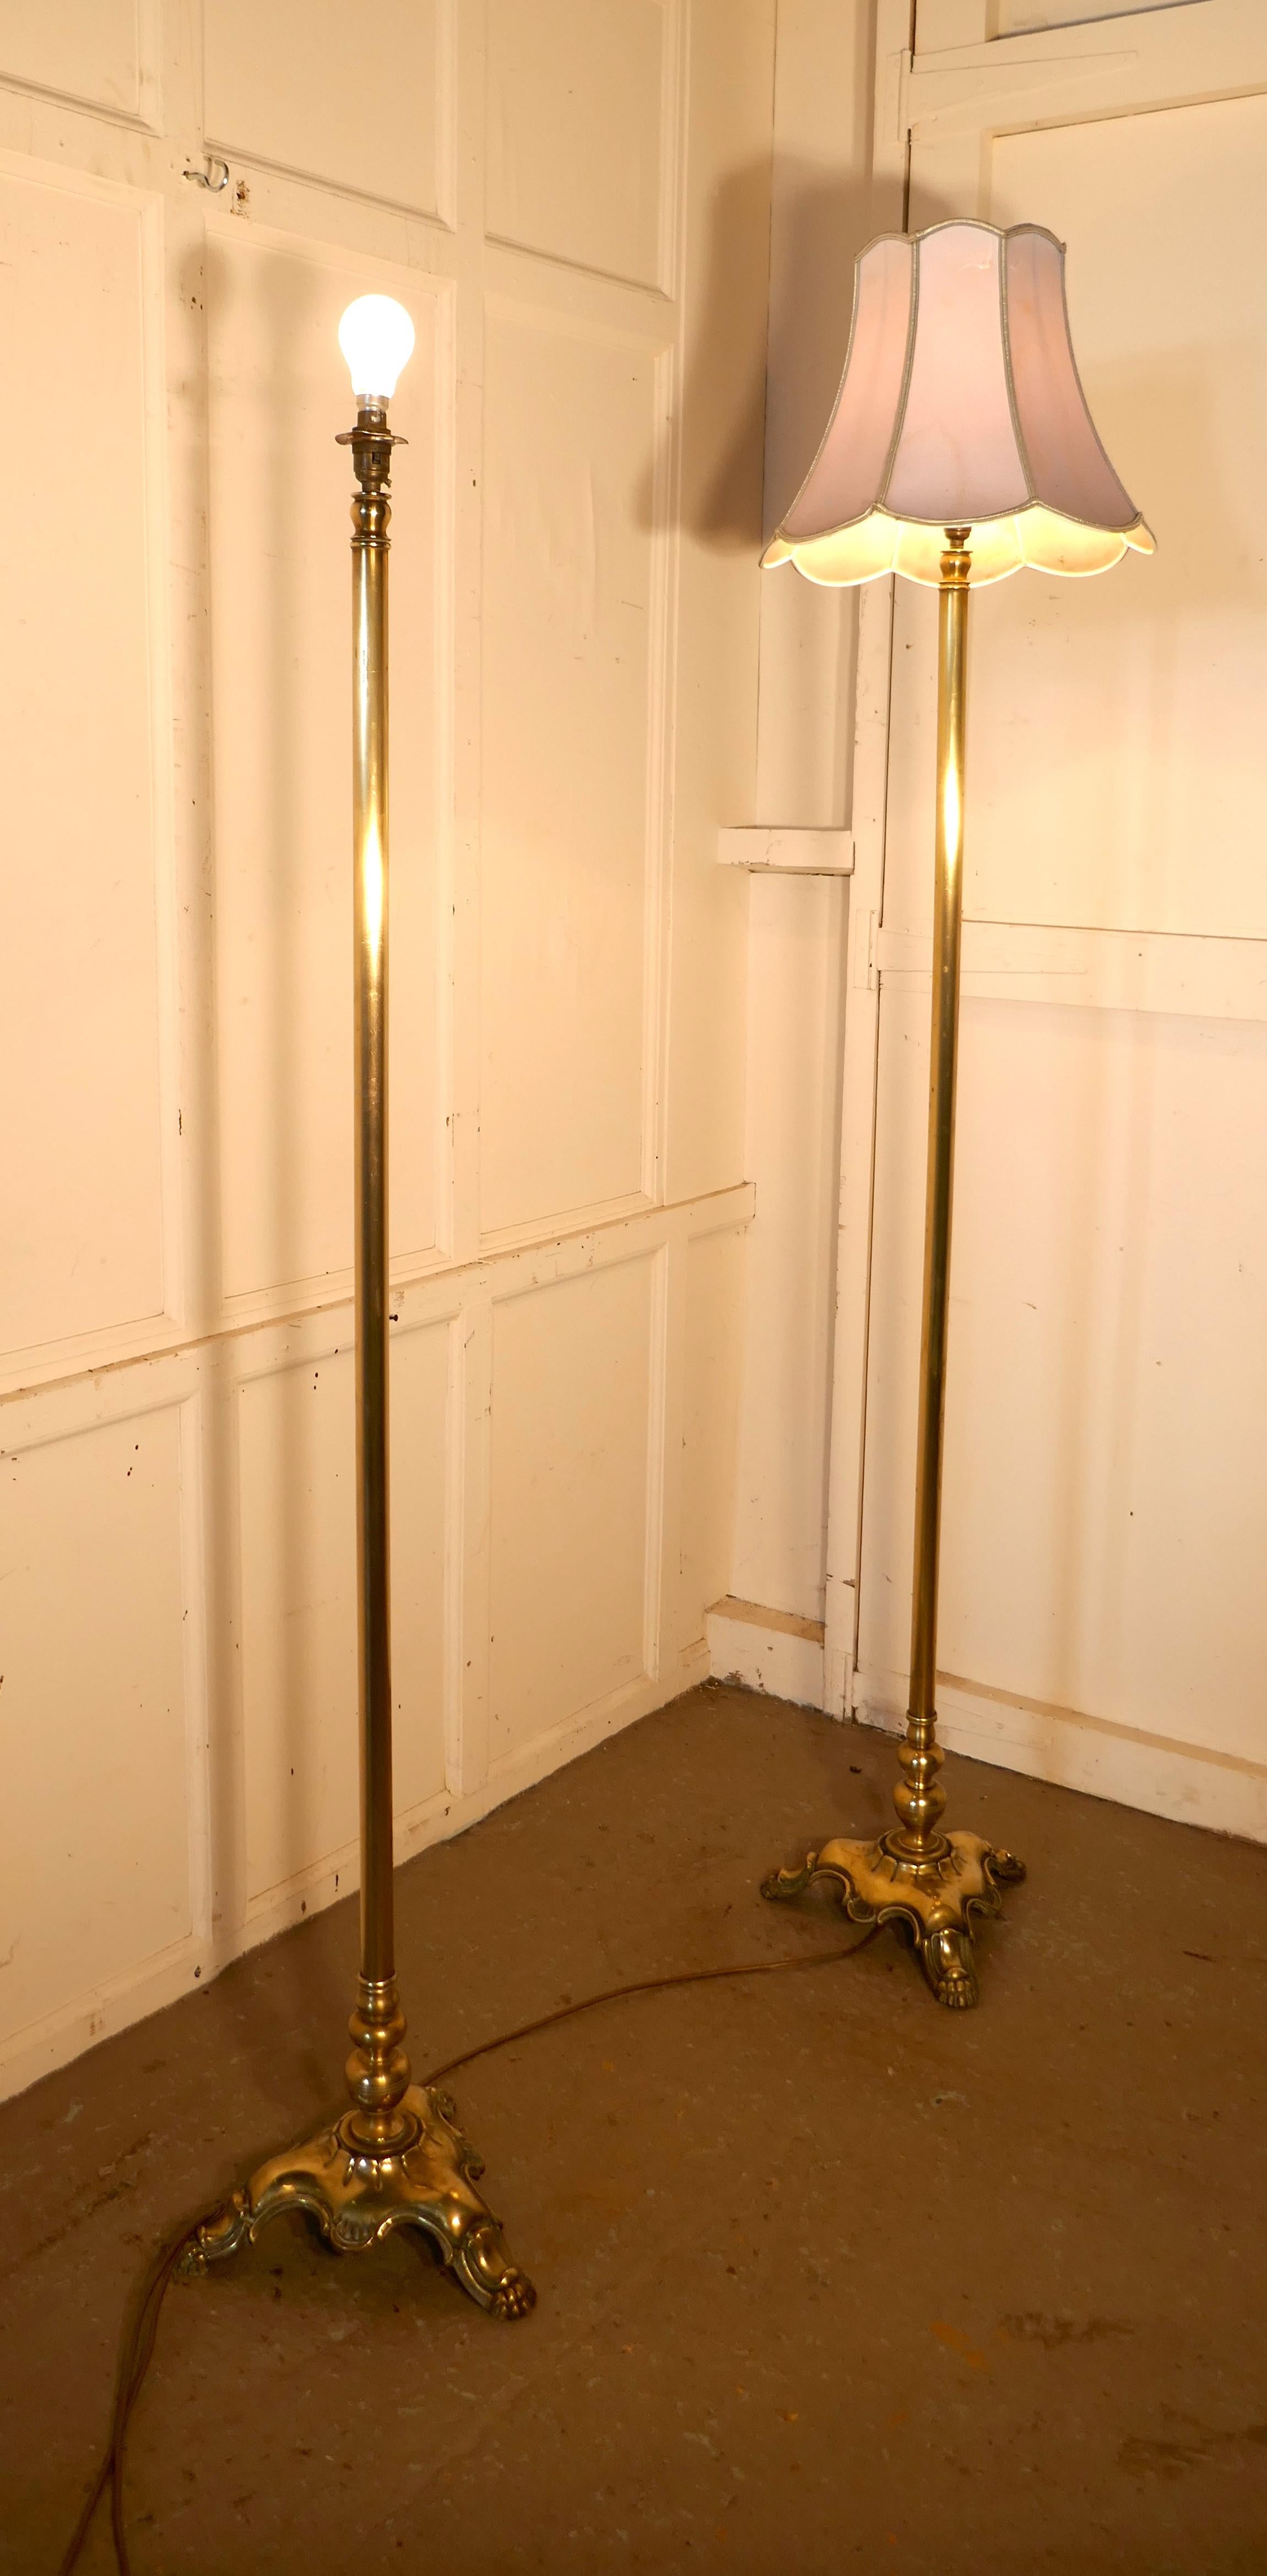 Pair of Tall Heavy Floor Lamps, Brass Arts & Crafts Standard Lamps 3